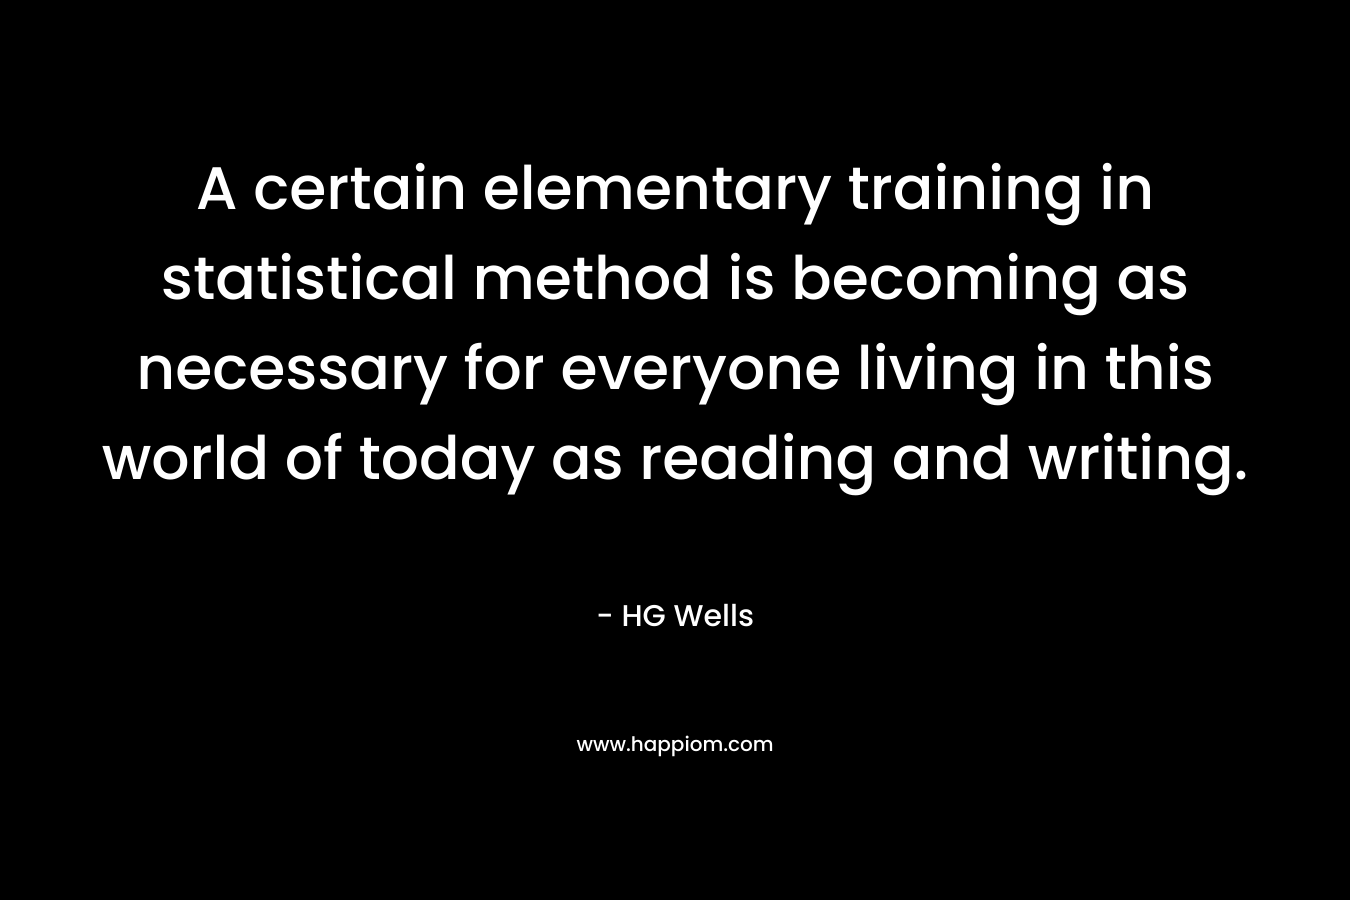 A certain elementary training in statistical method is becoming as necessary for everyone living in this world of today as reading and writing. – HG Wells